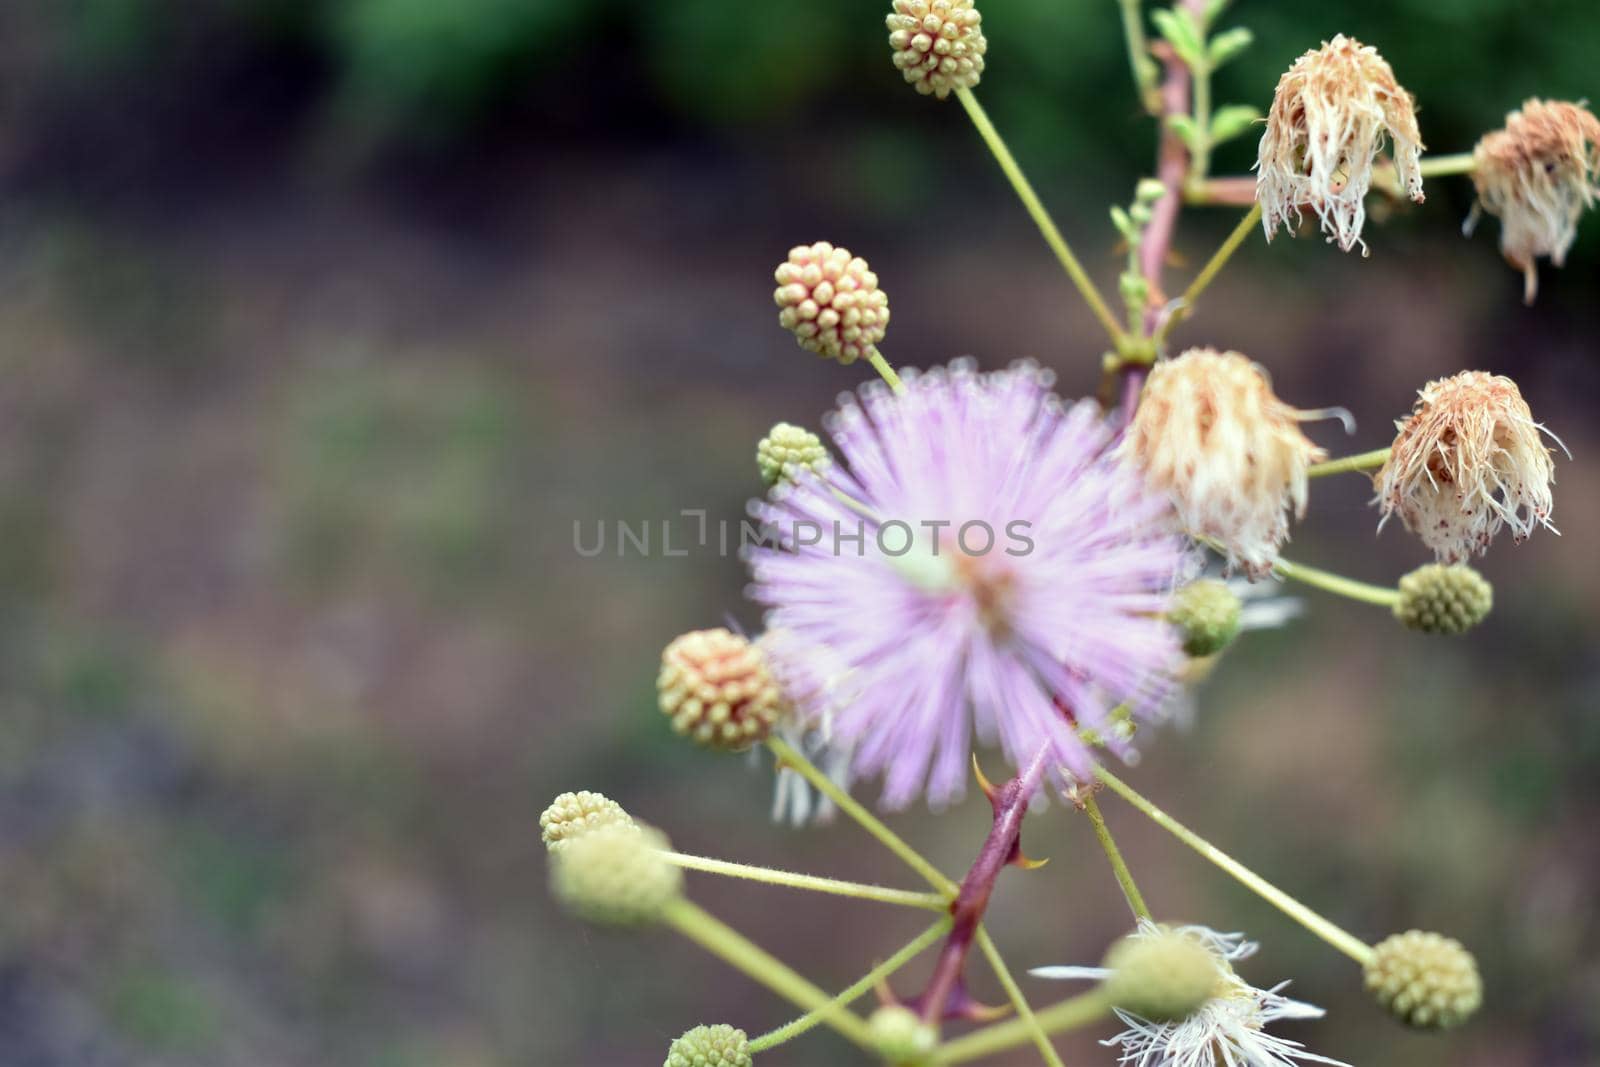 Herb plant,Mimosa pudica (Sensitive plant, sleepy plant, Sleeping grass, the touch-me-not)F by tabishere